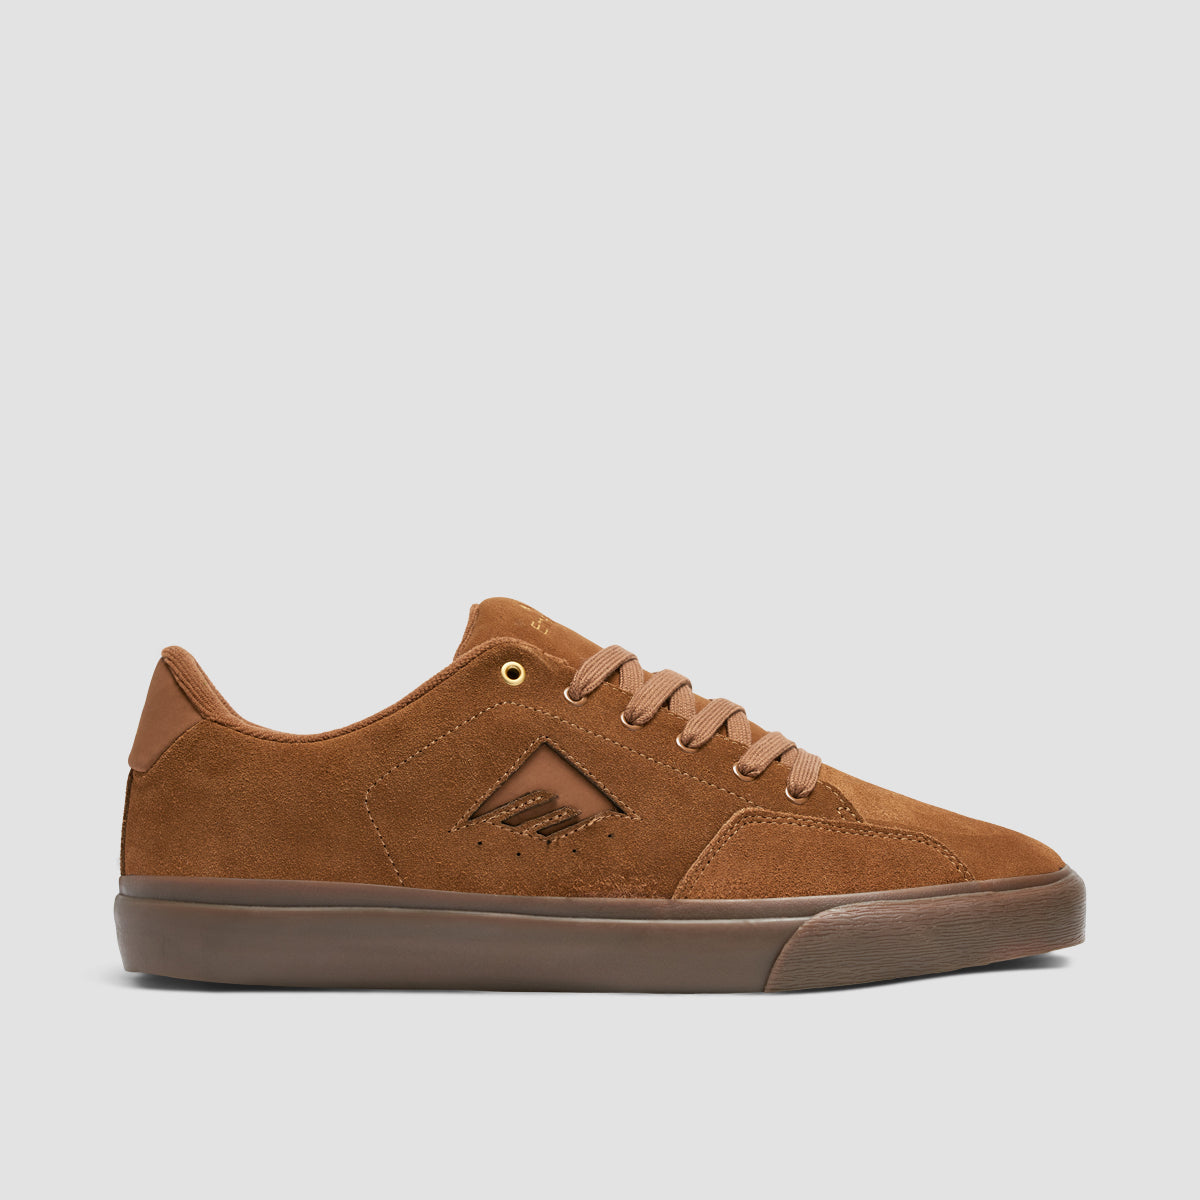 Emerica Temple Shoes Brown/Gum